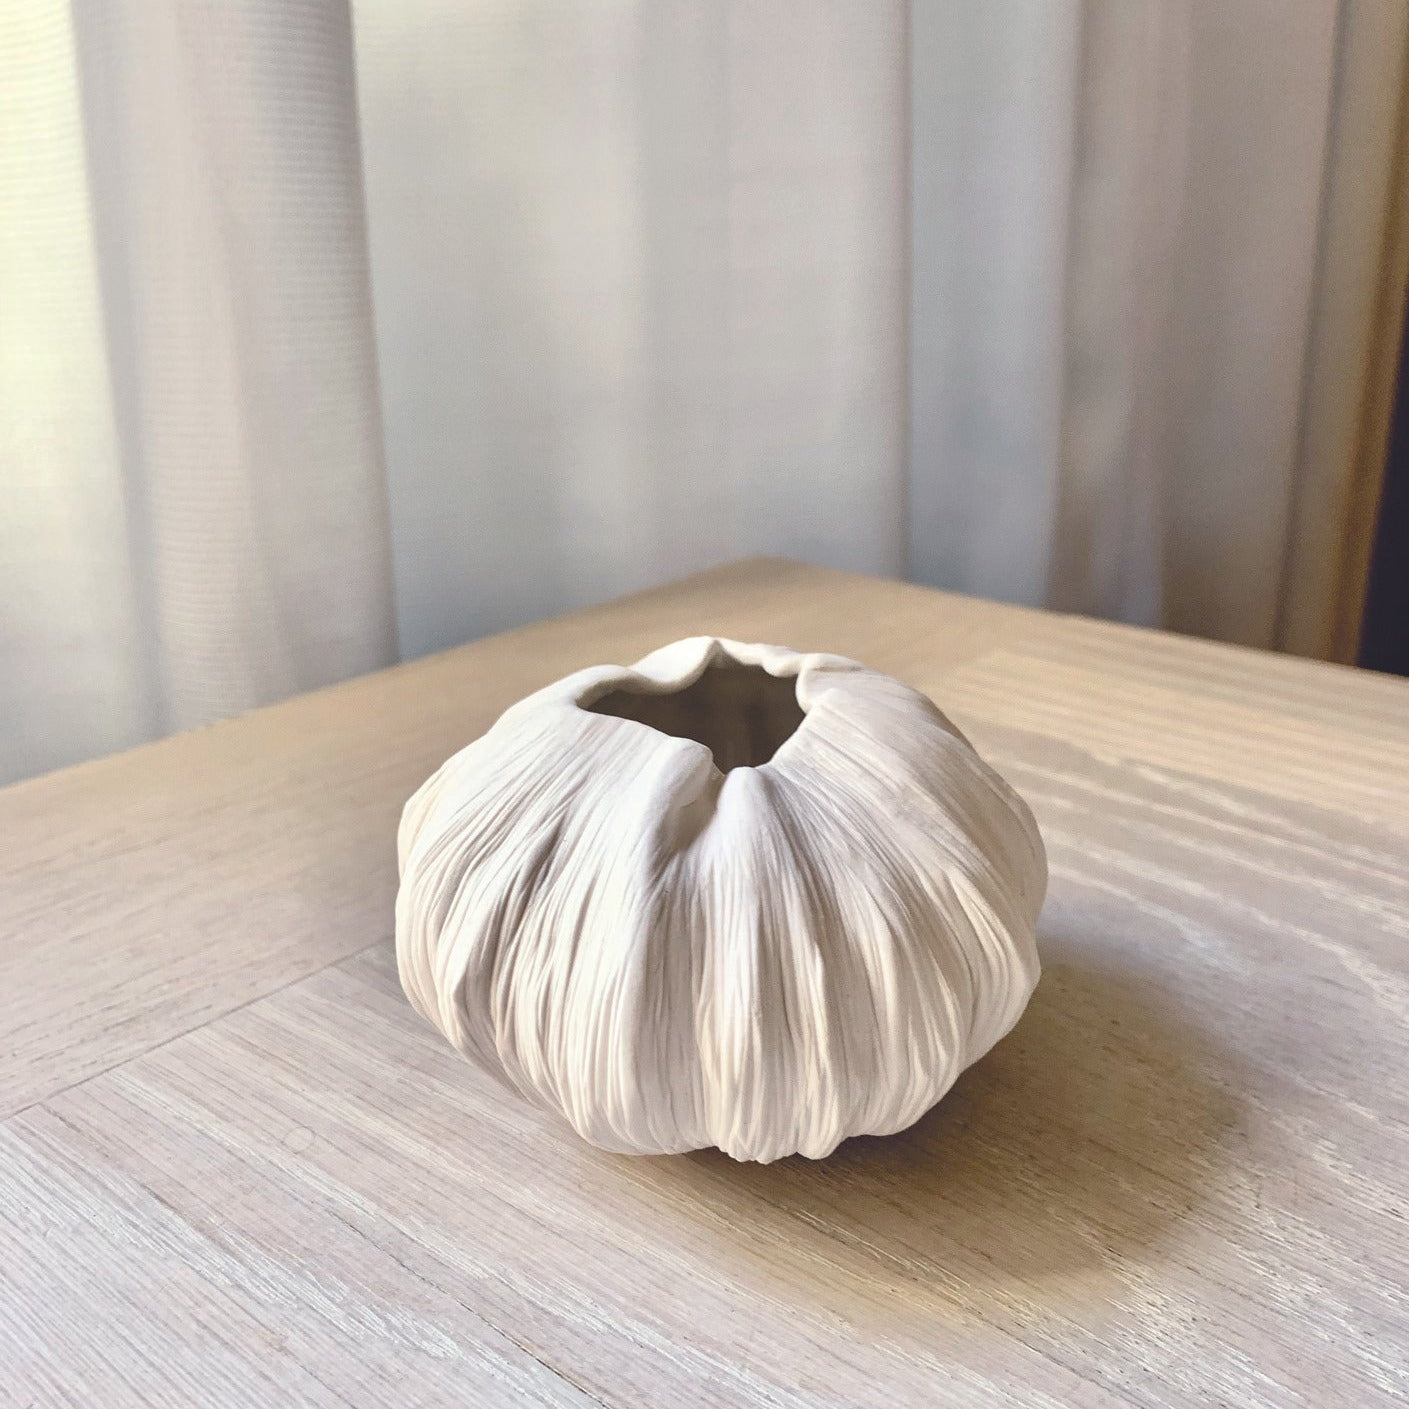 Roundish porcelain pinch pot vase. The vase is shaped and altered from a ball of porcelain clay. It's carved with fine carving tool around the entire vase. The vase has uneven/altered rim.